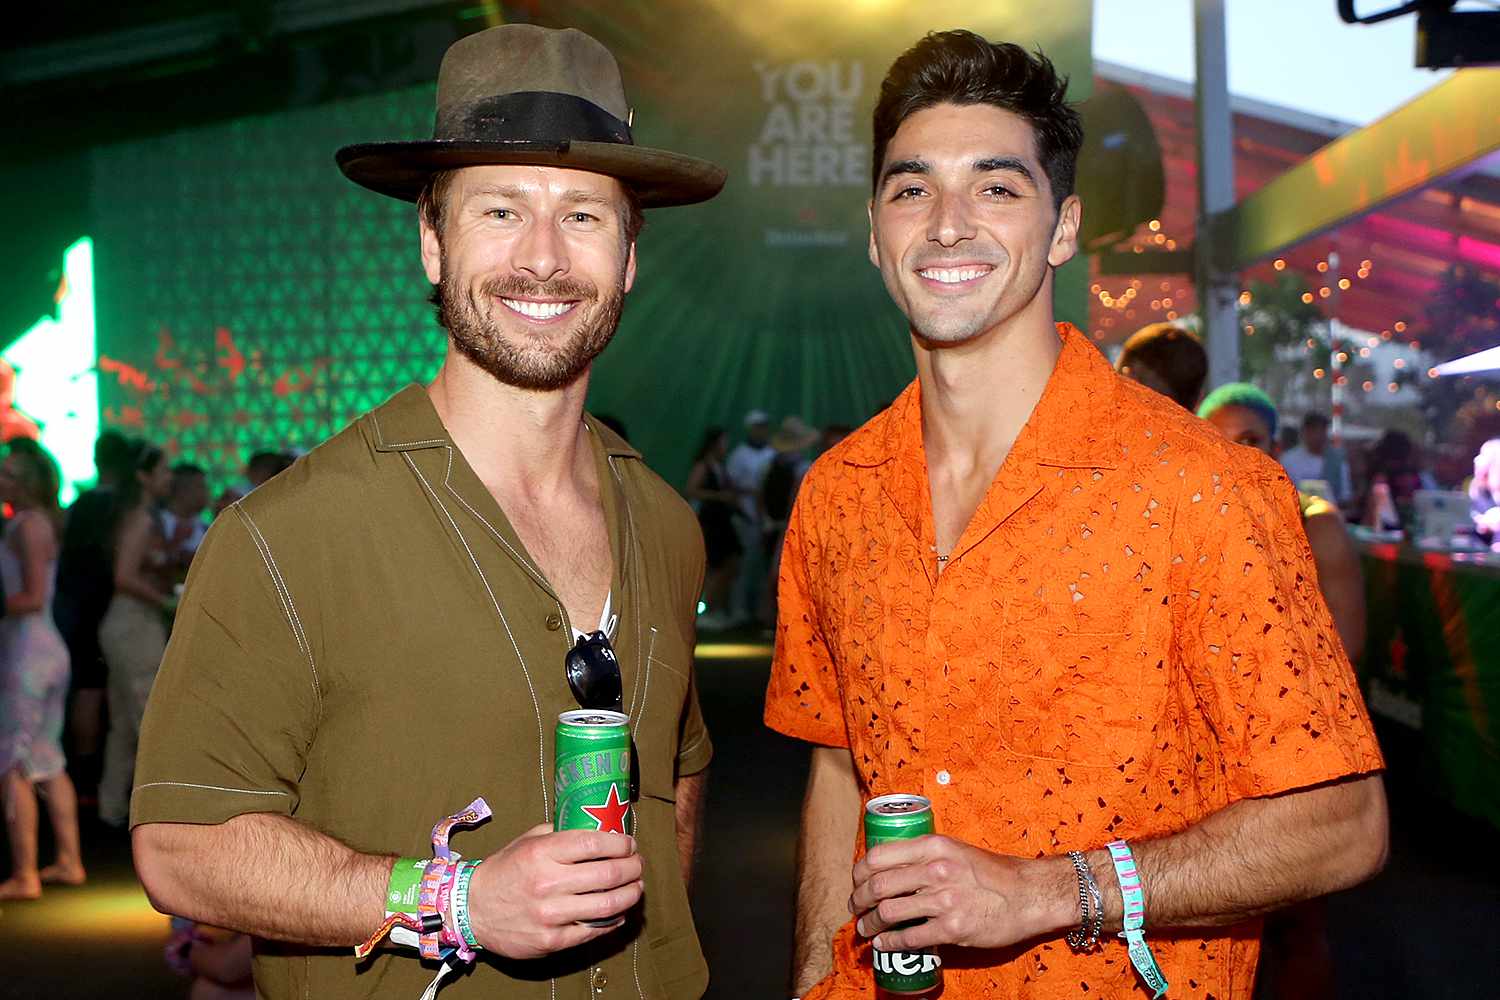 Glen Powell and Taylor Zakhar Perez enjoy a Heineken at the Heineken House at the 2022 Coachella Valley Music and Arts Festival on April 15, 2022 in Indio, California. 